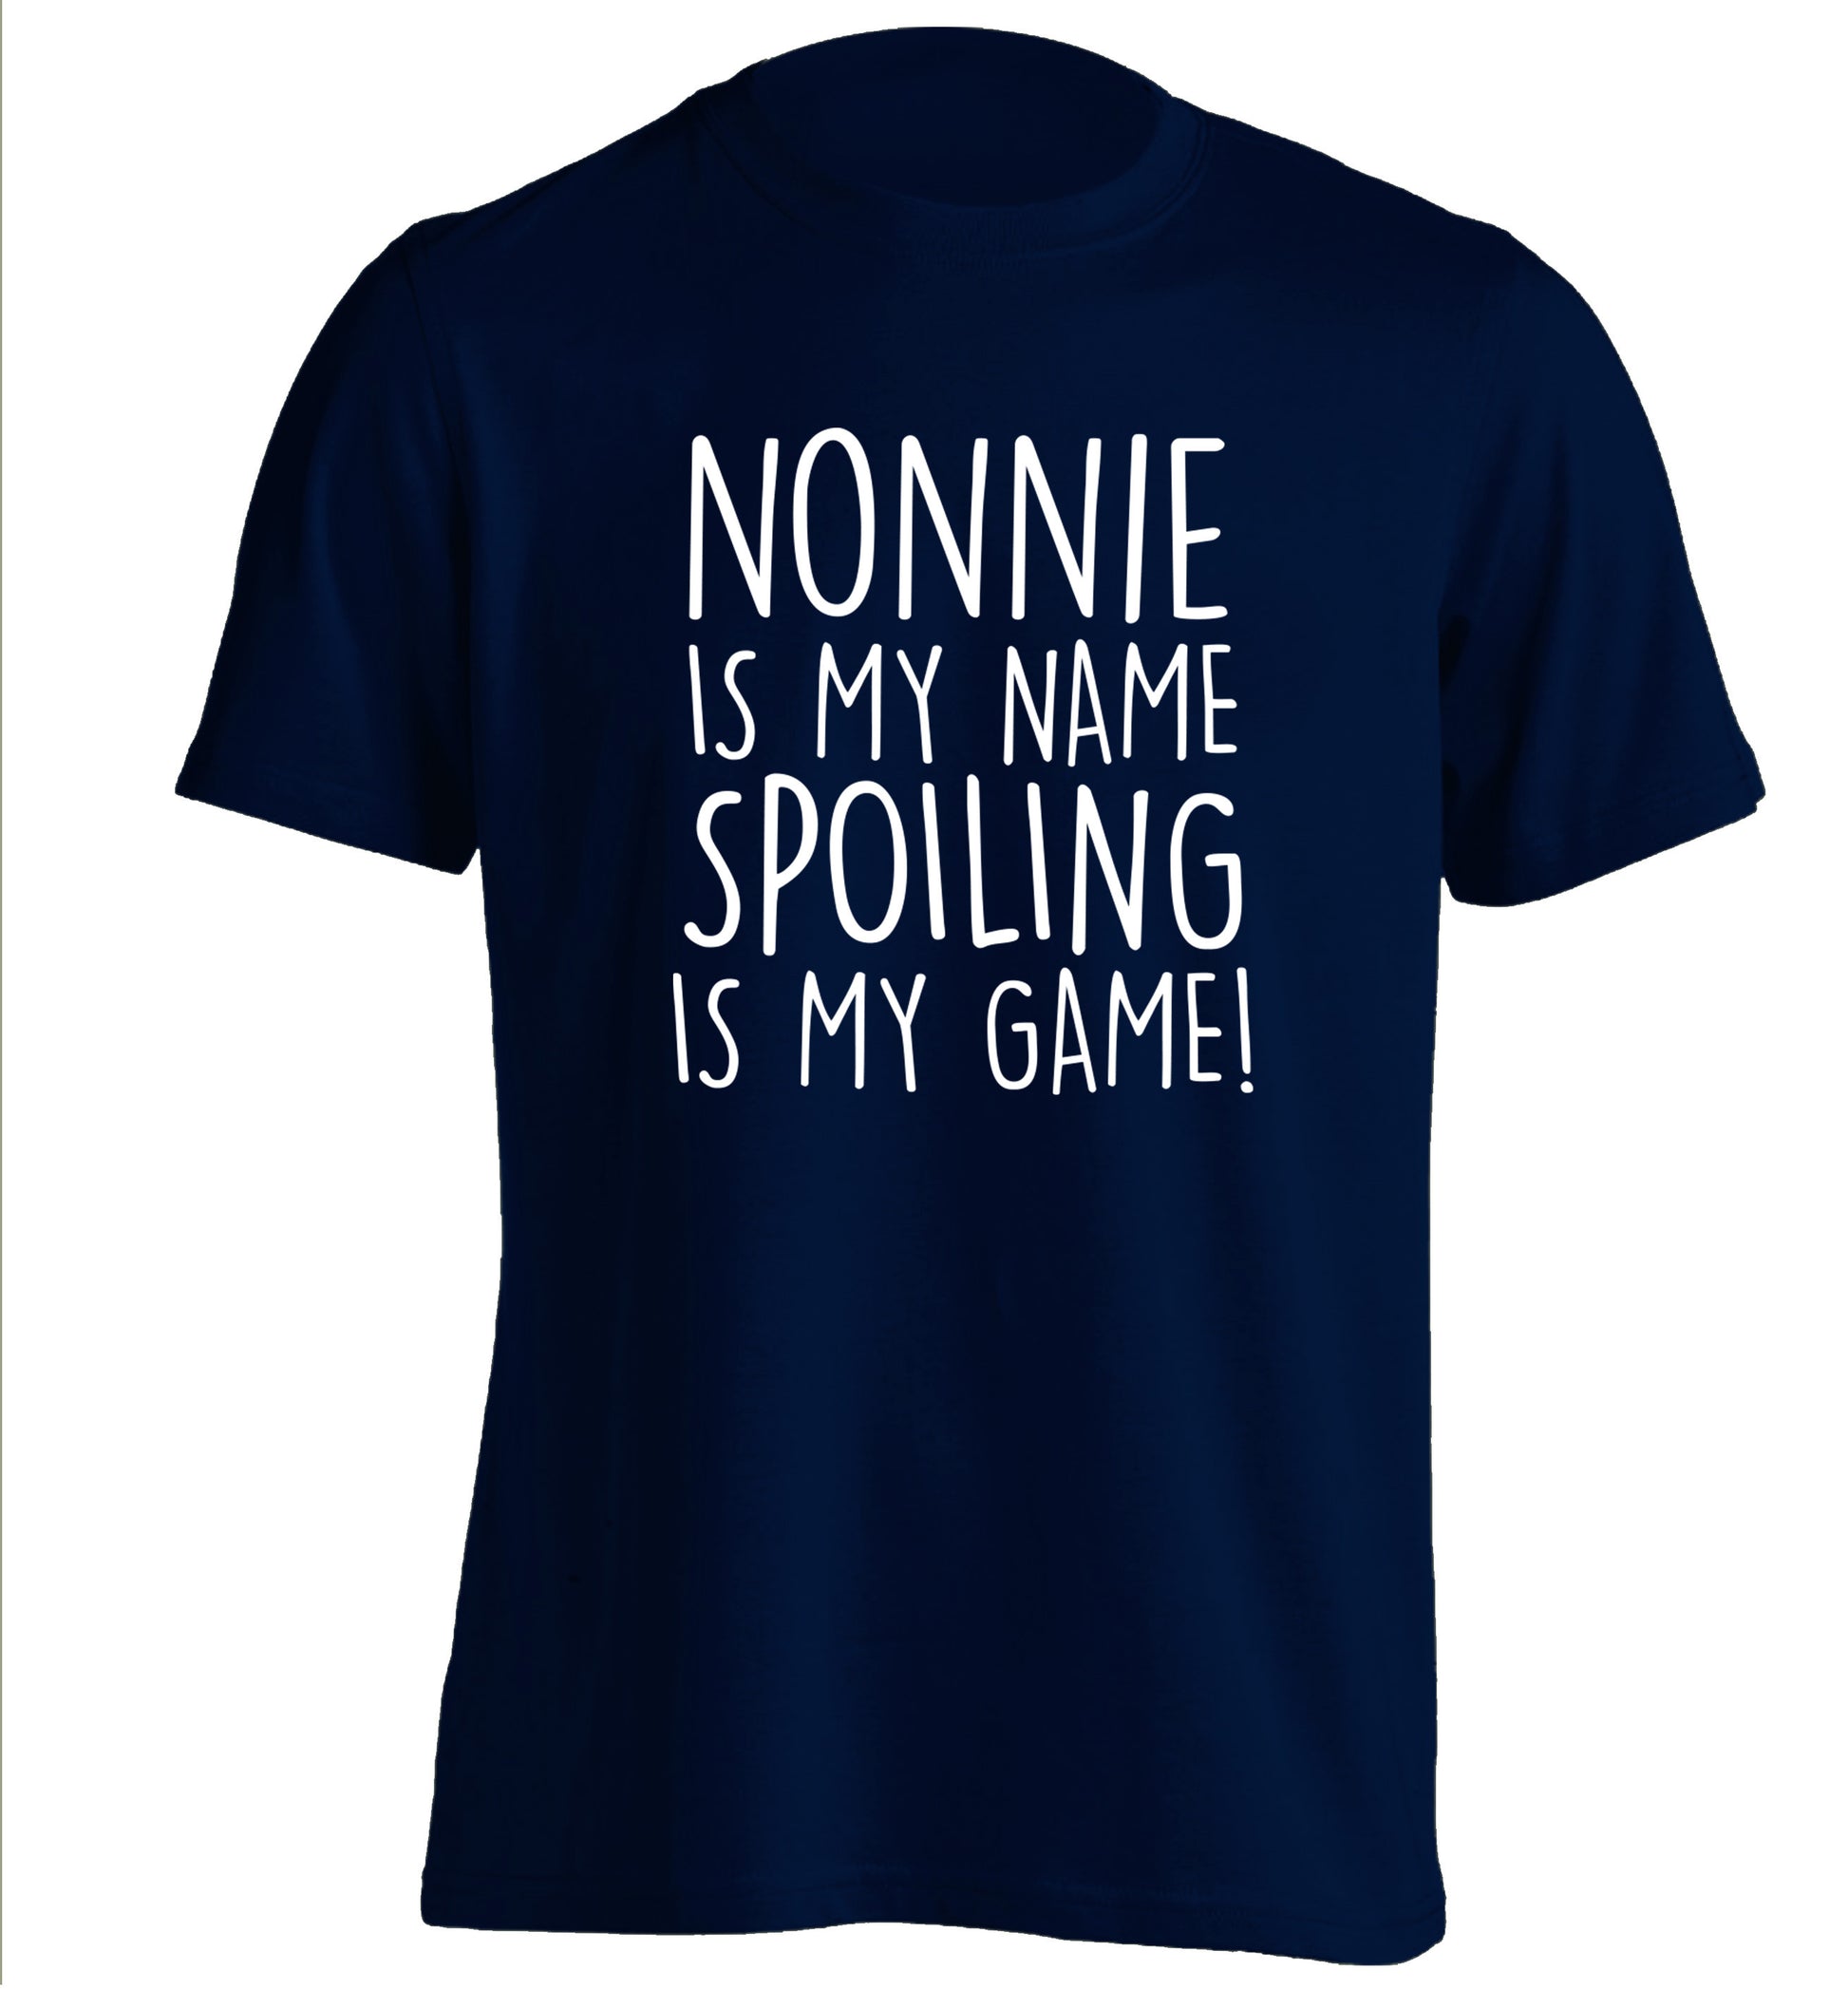 Nonnie is my name, spoiling is my game adults unisex navy Tshirt 2XL